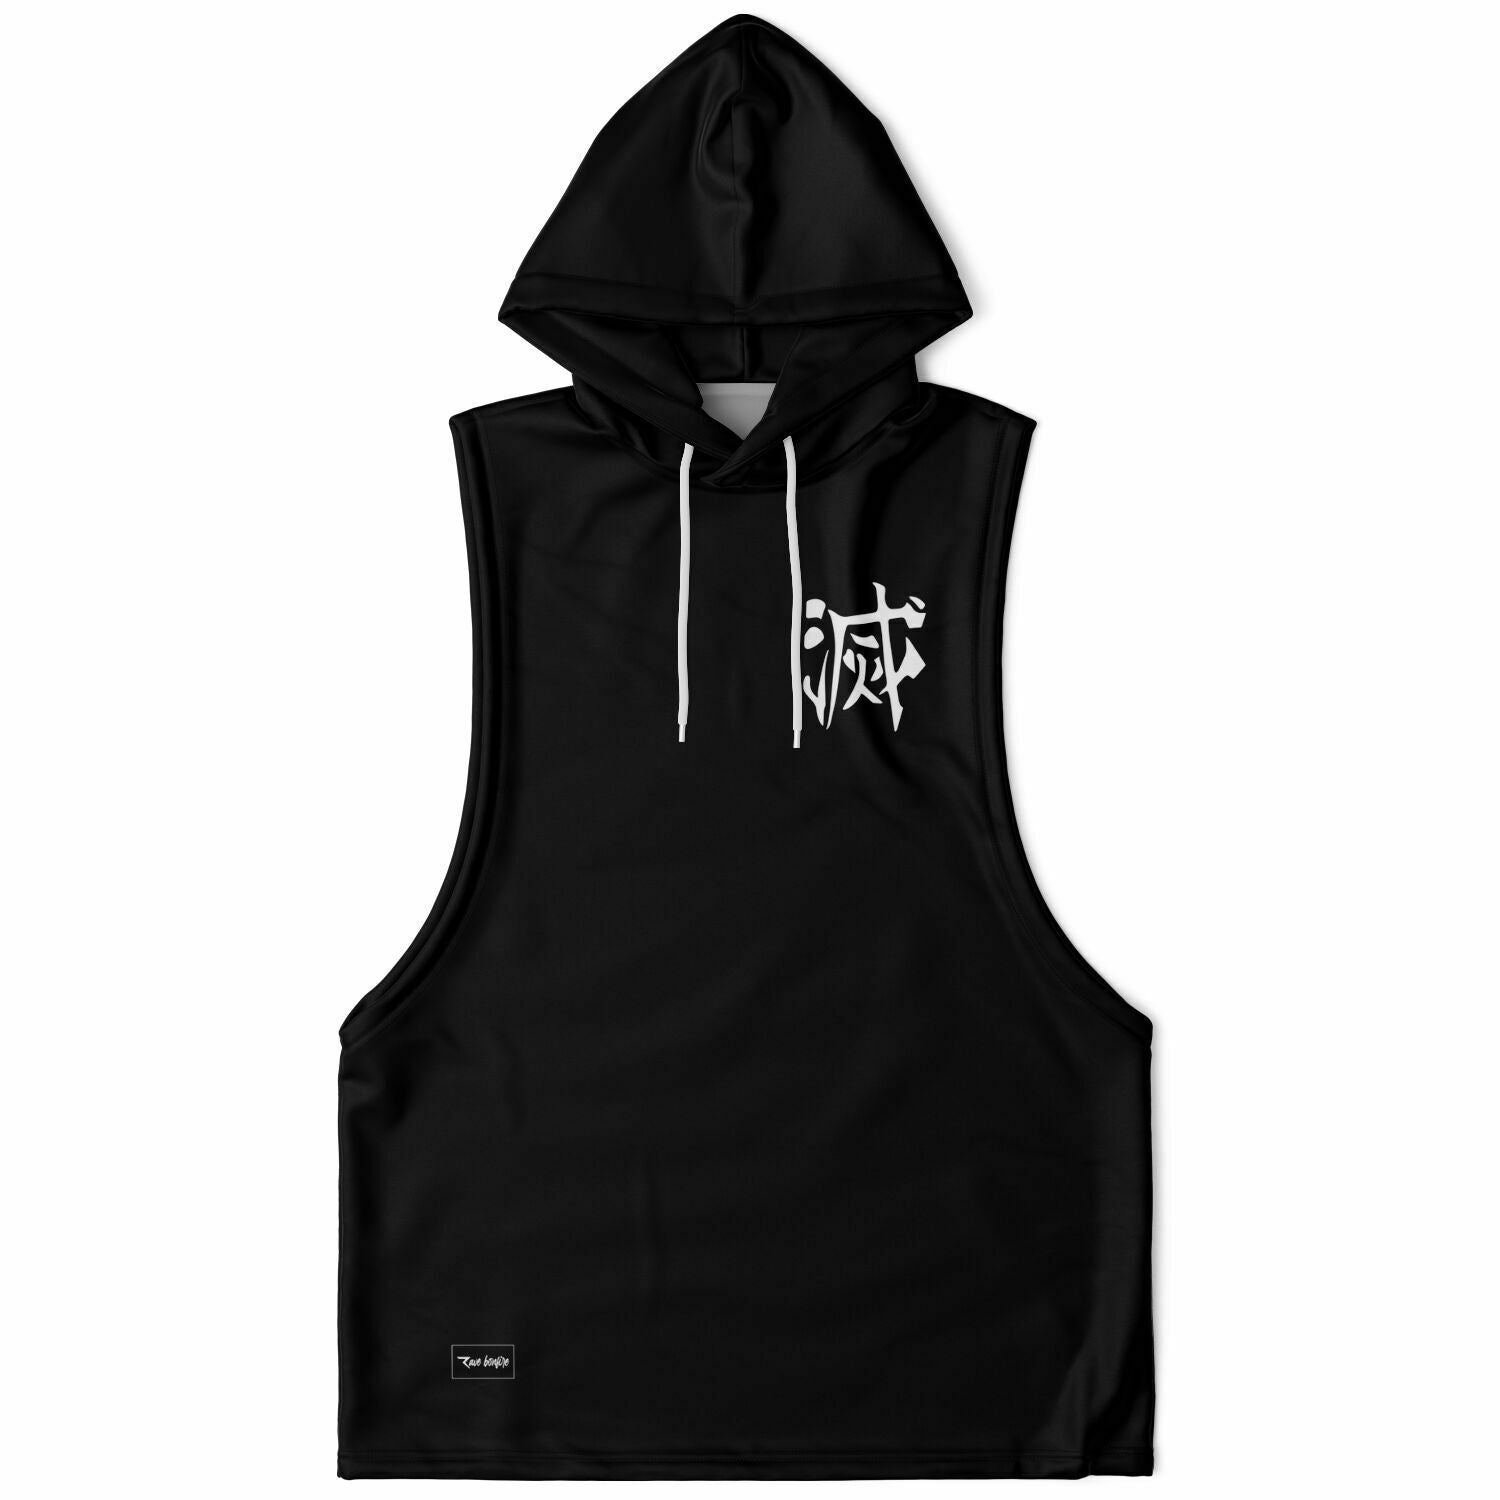 A Bass slayer Sleeveless hoodie with a white logo on it.